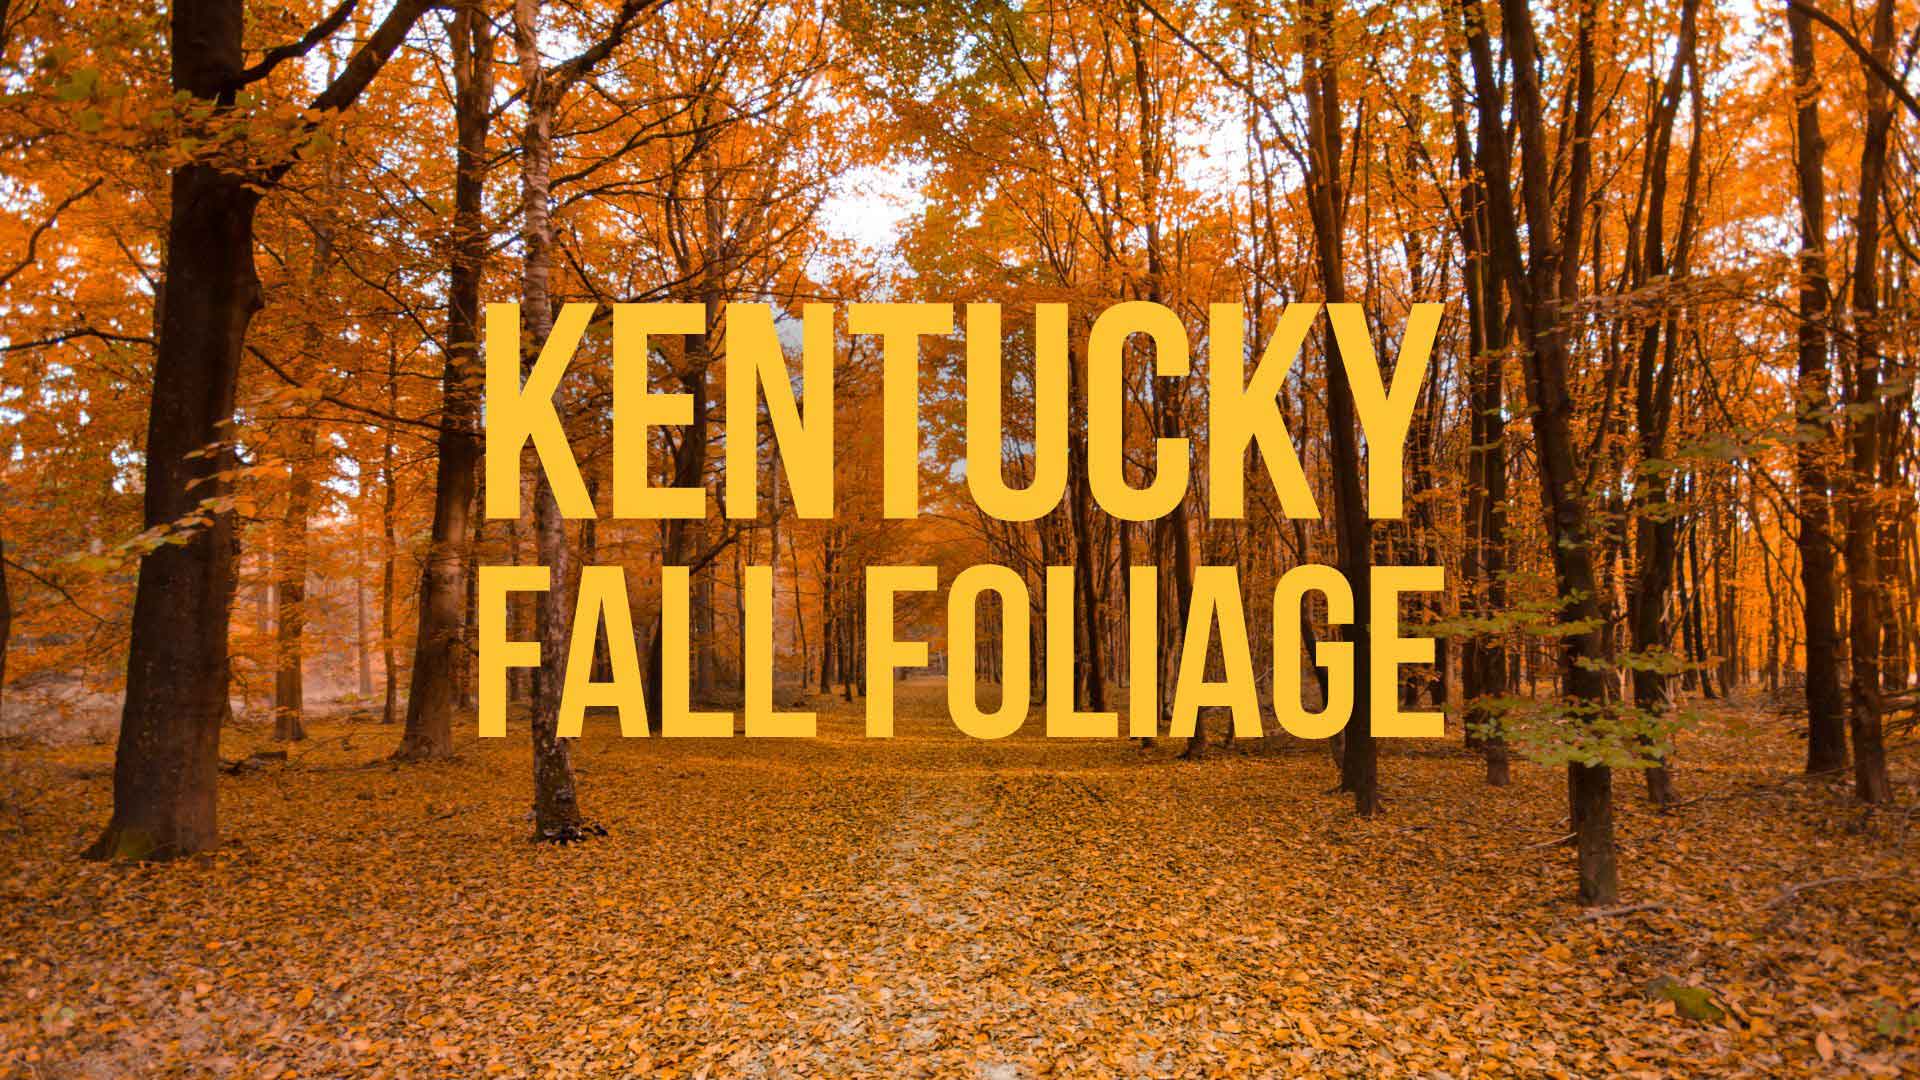 Kentucky Fall Foliage When Do Leaves Change Color? KY Supply Co